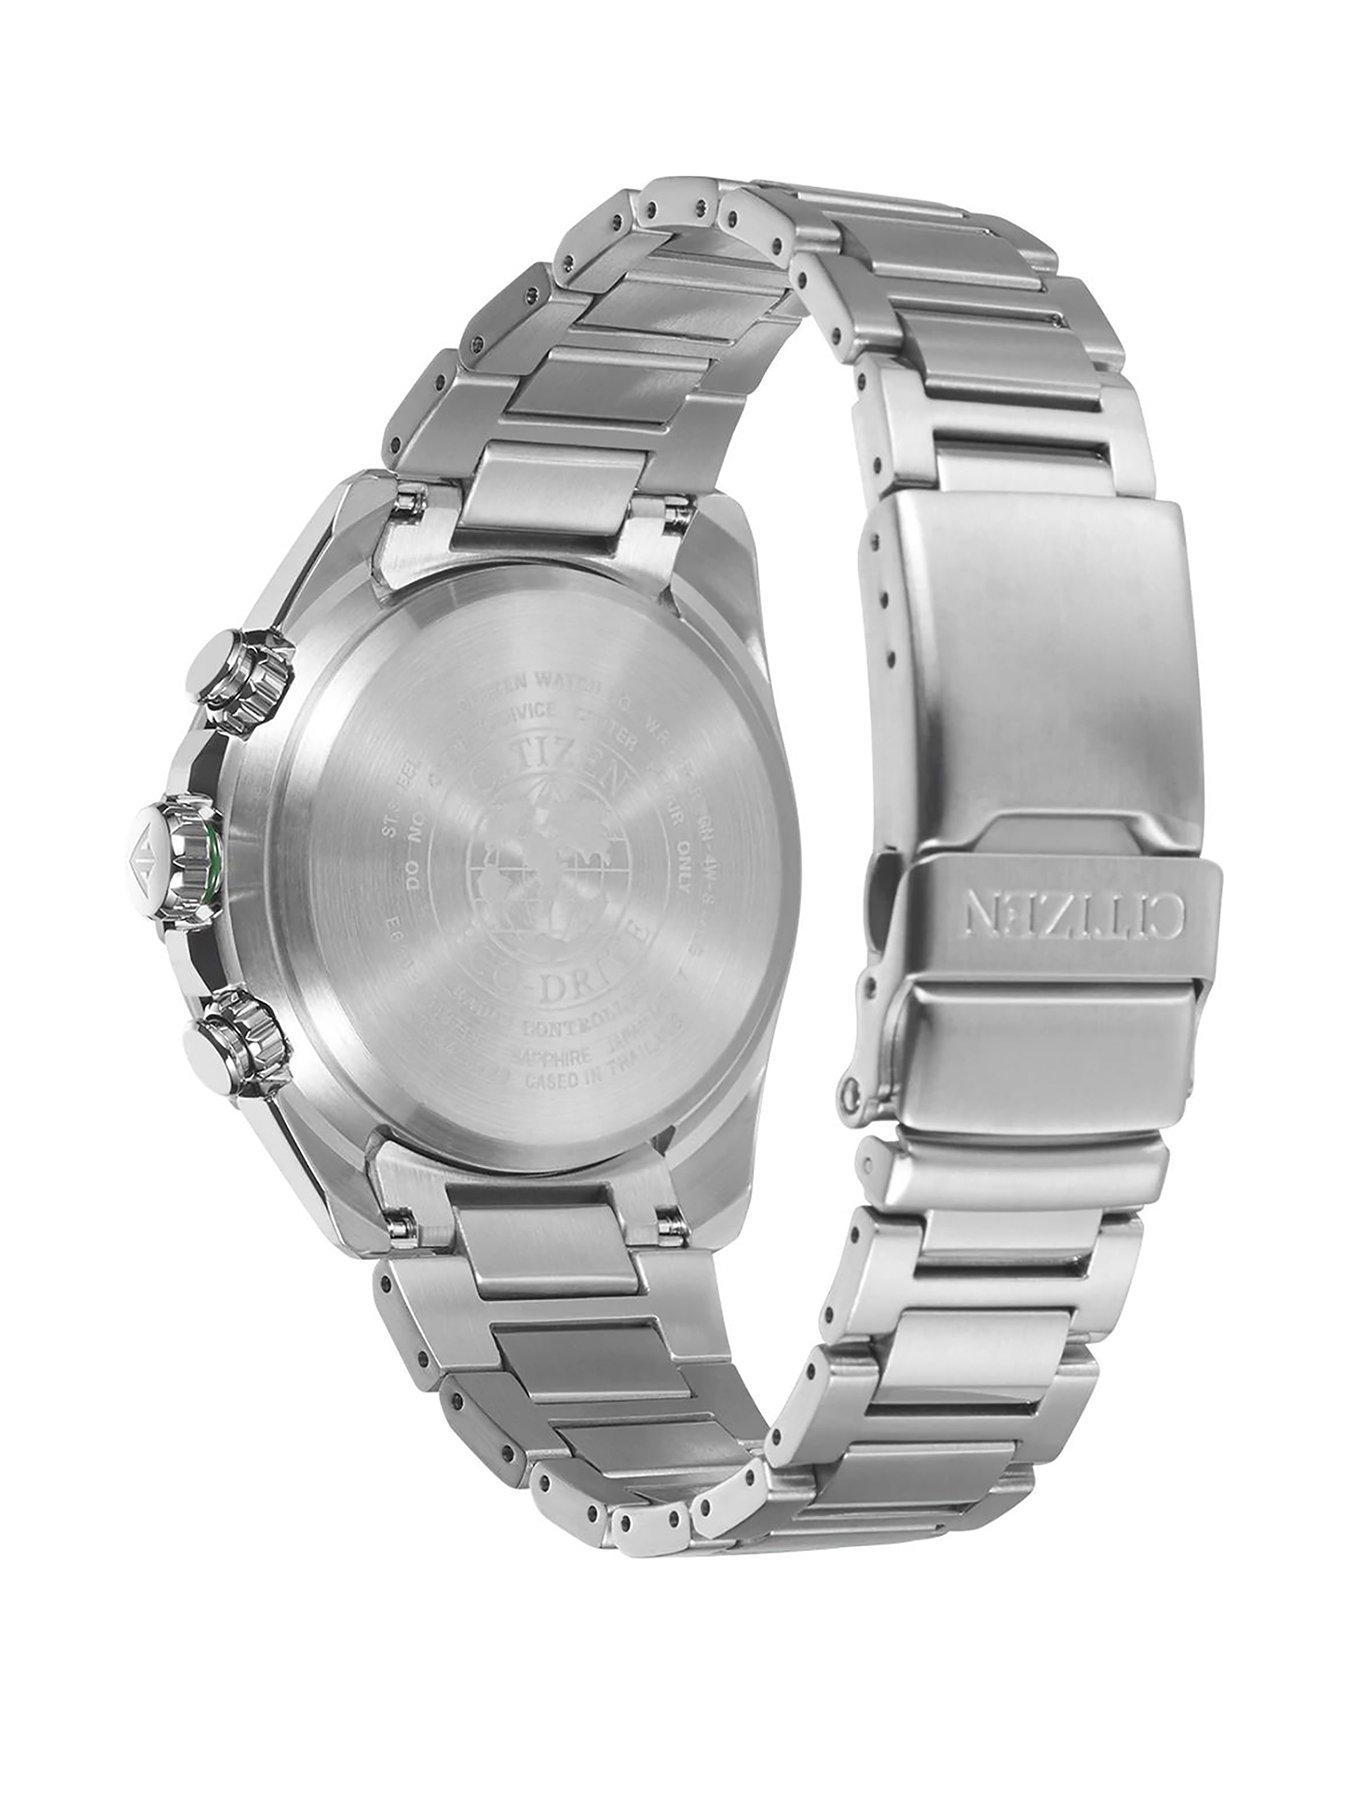 Citizen Eco Drive Promaster GN-4W-S Watch WR200 Available Worldwide